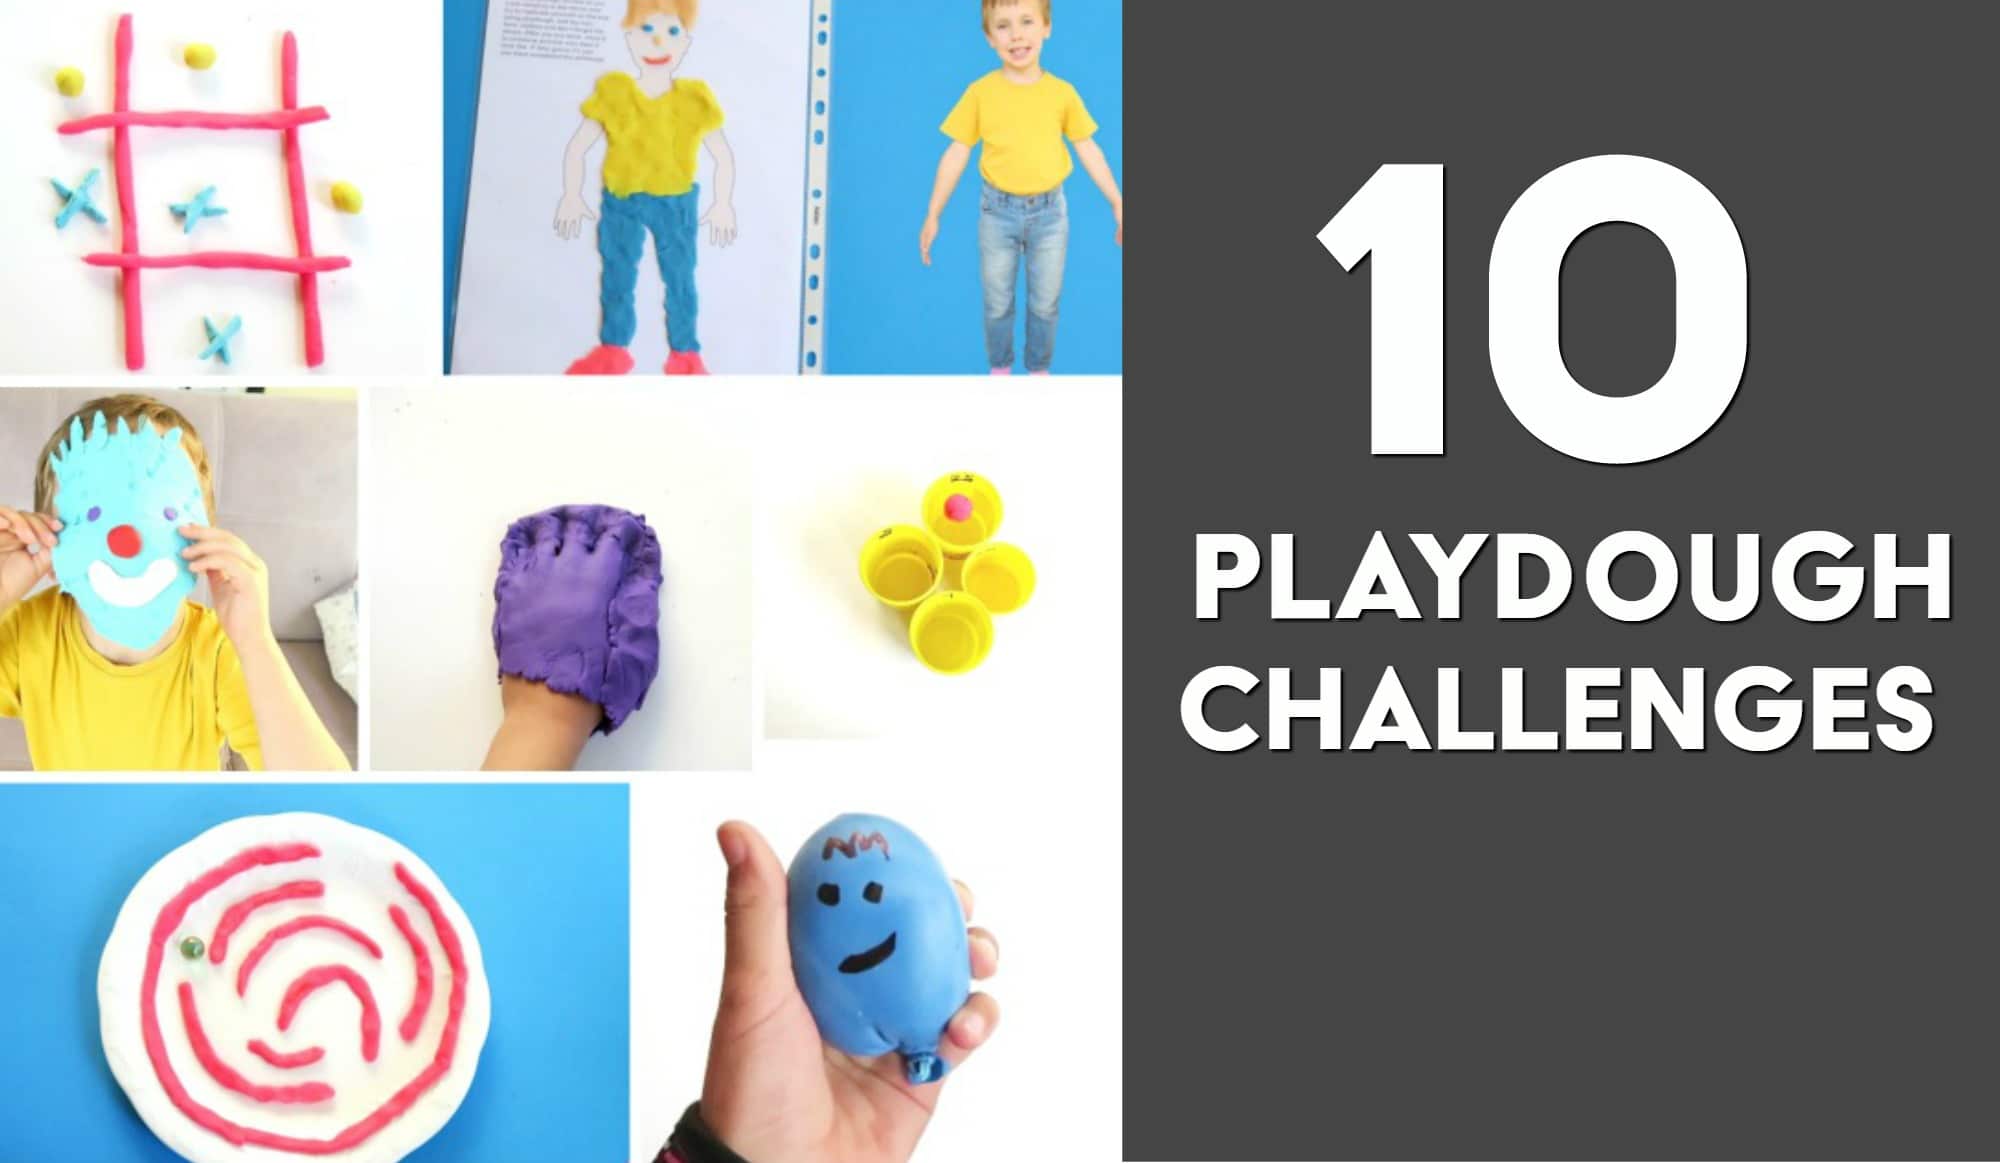 10 playdough challnges poster.